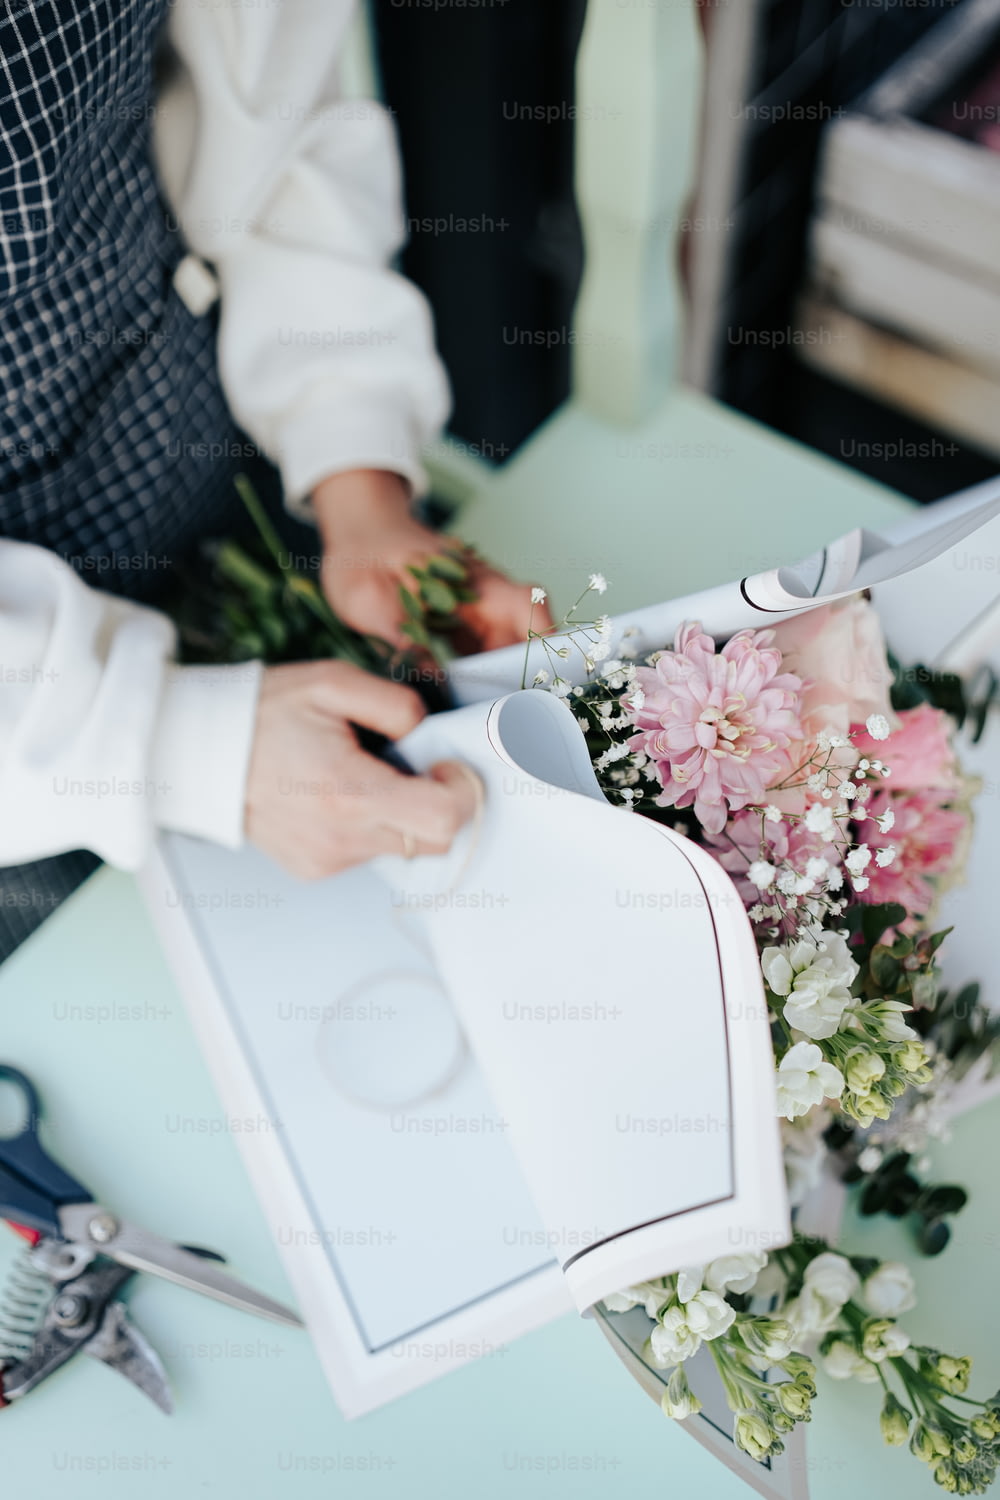 a person cutting a bouquet of flowers with scissors